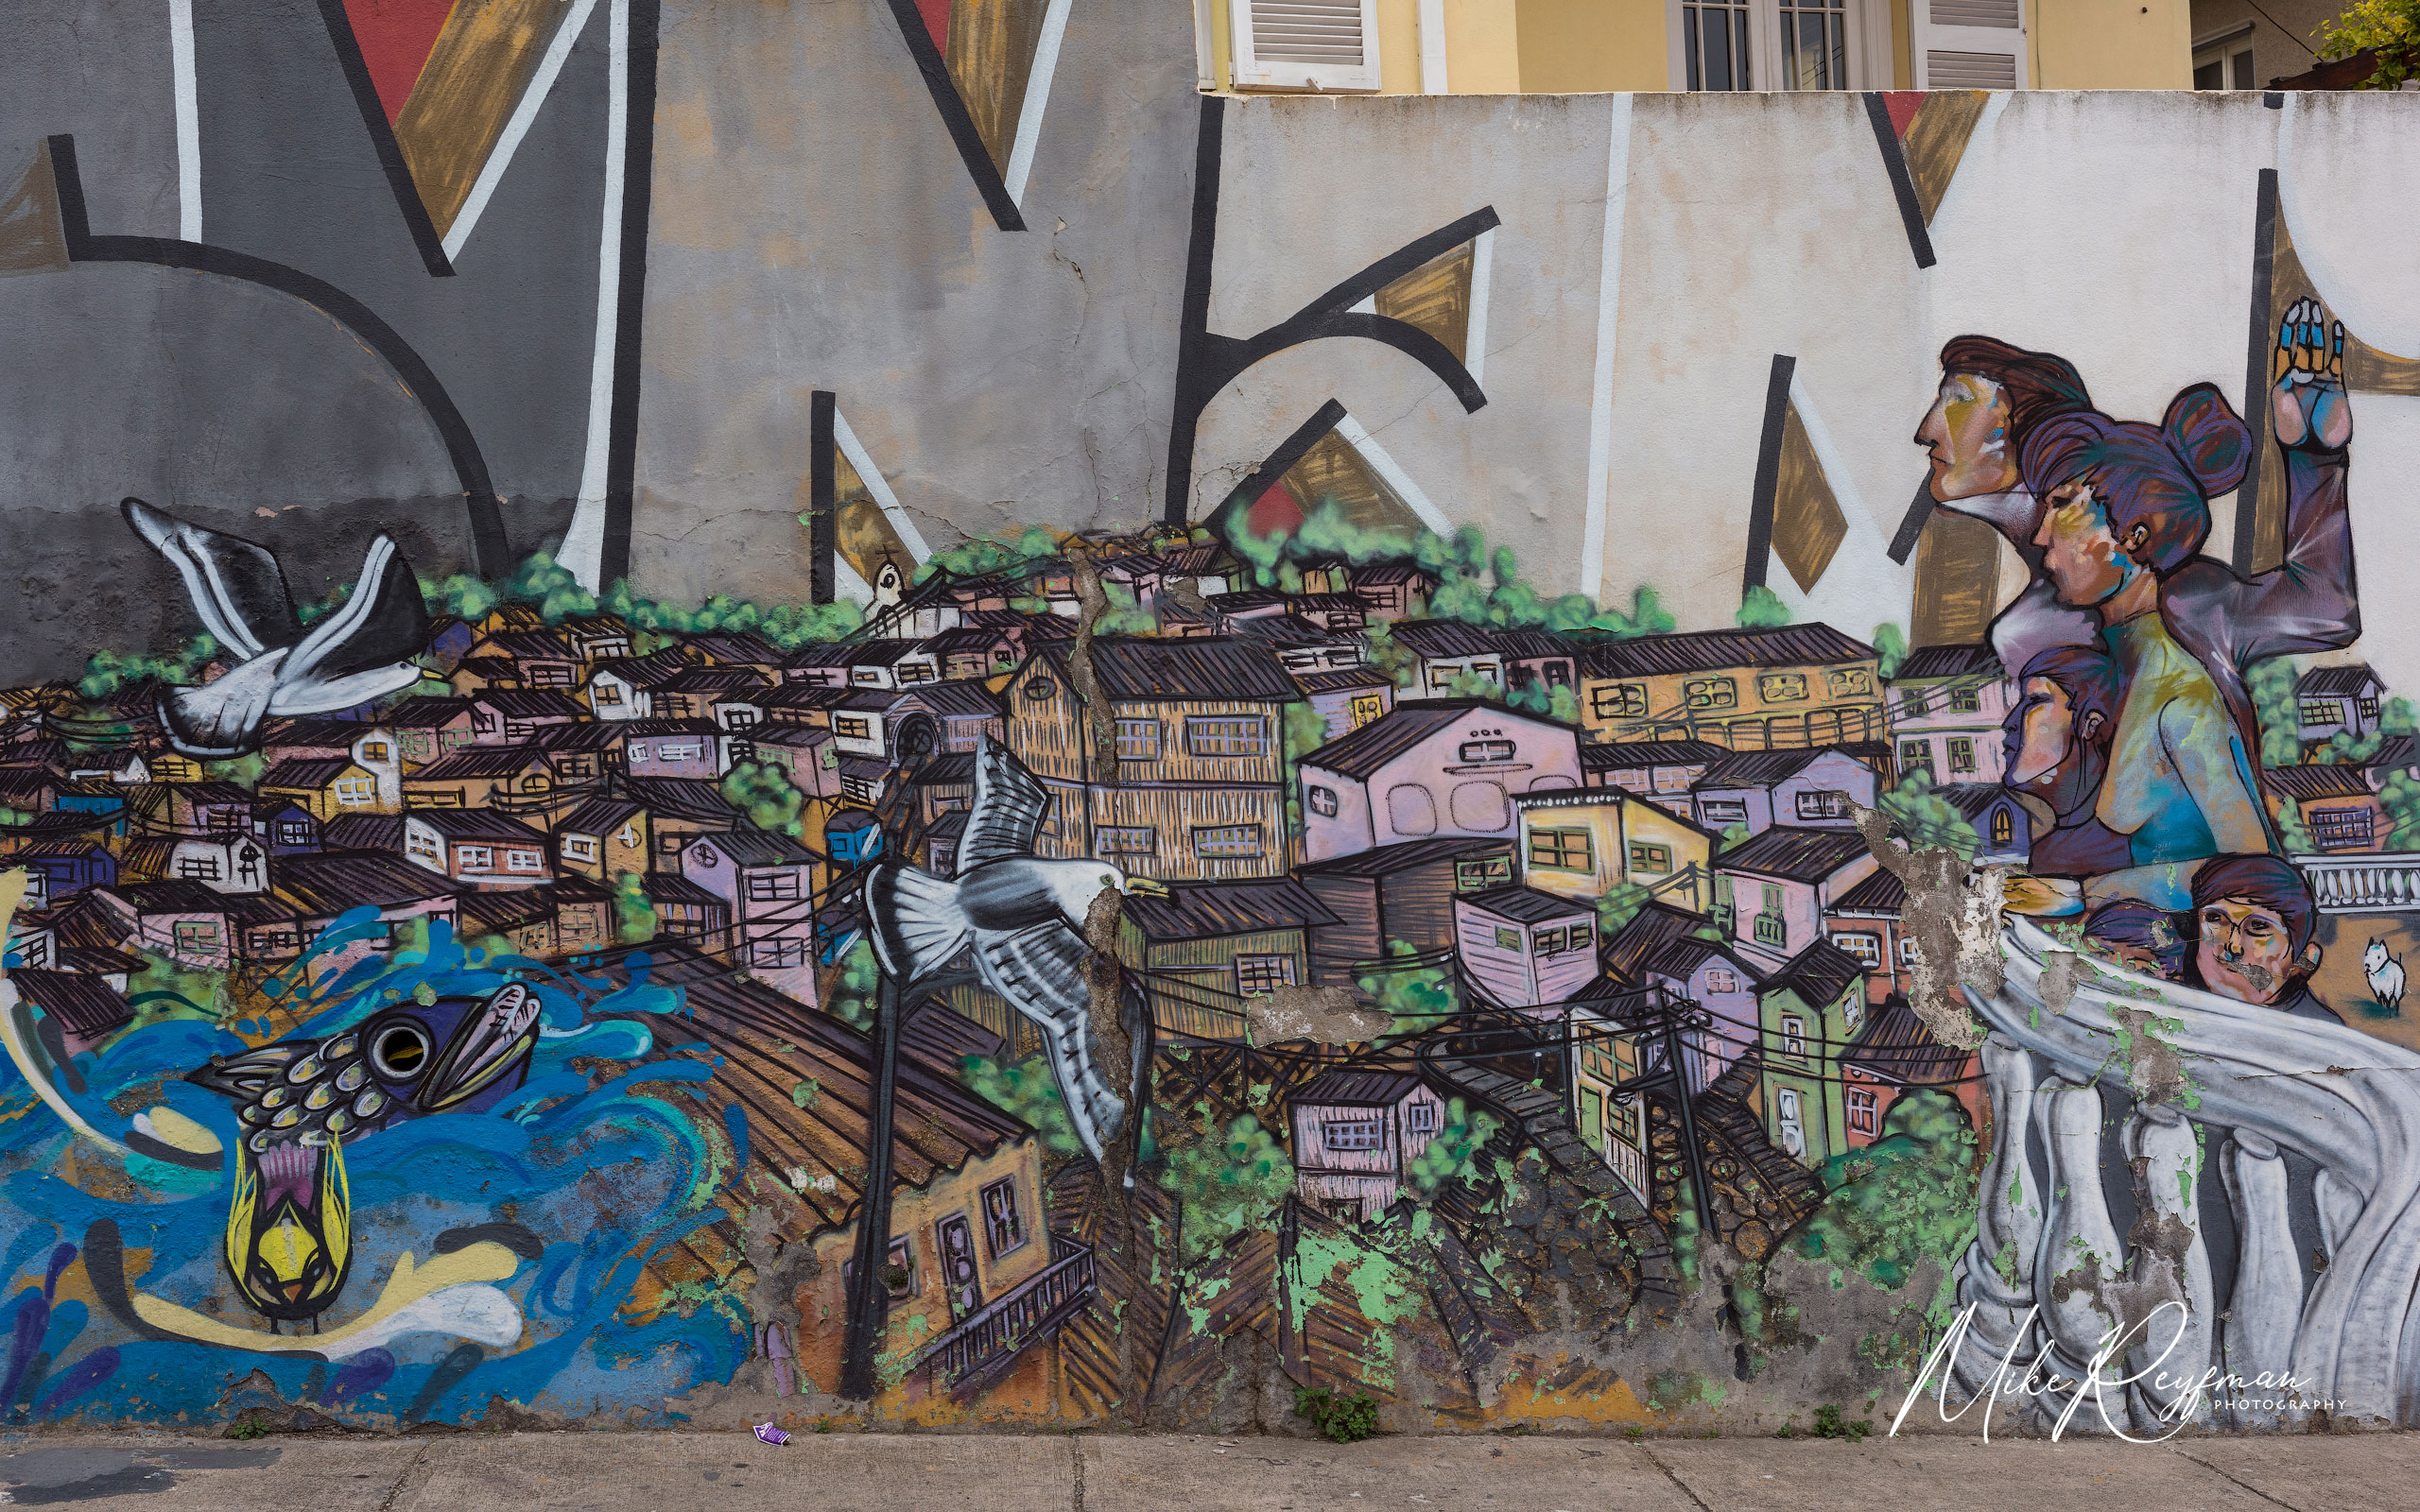 Valparaiso, Chile. The Graffiti Capital of the World 012-VP _D1D0192 - Valparaiso, Chile. The Graffiti Capital of the World - Mike Reyfman Photography